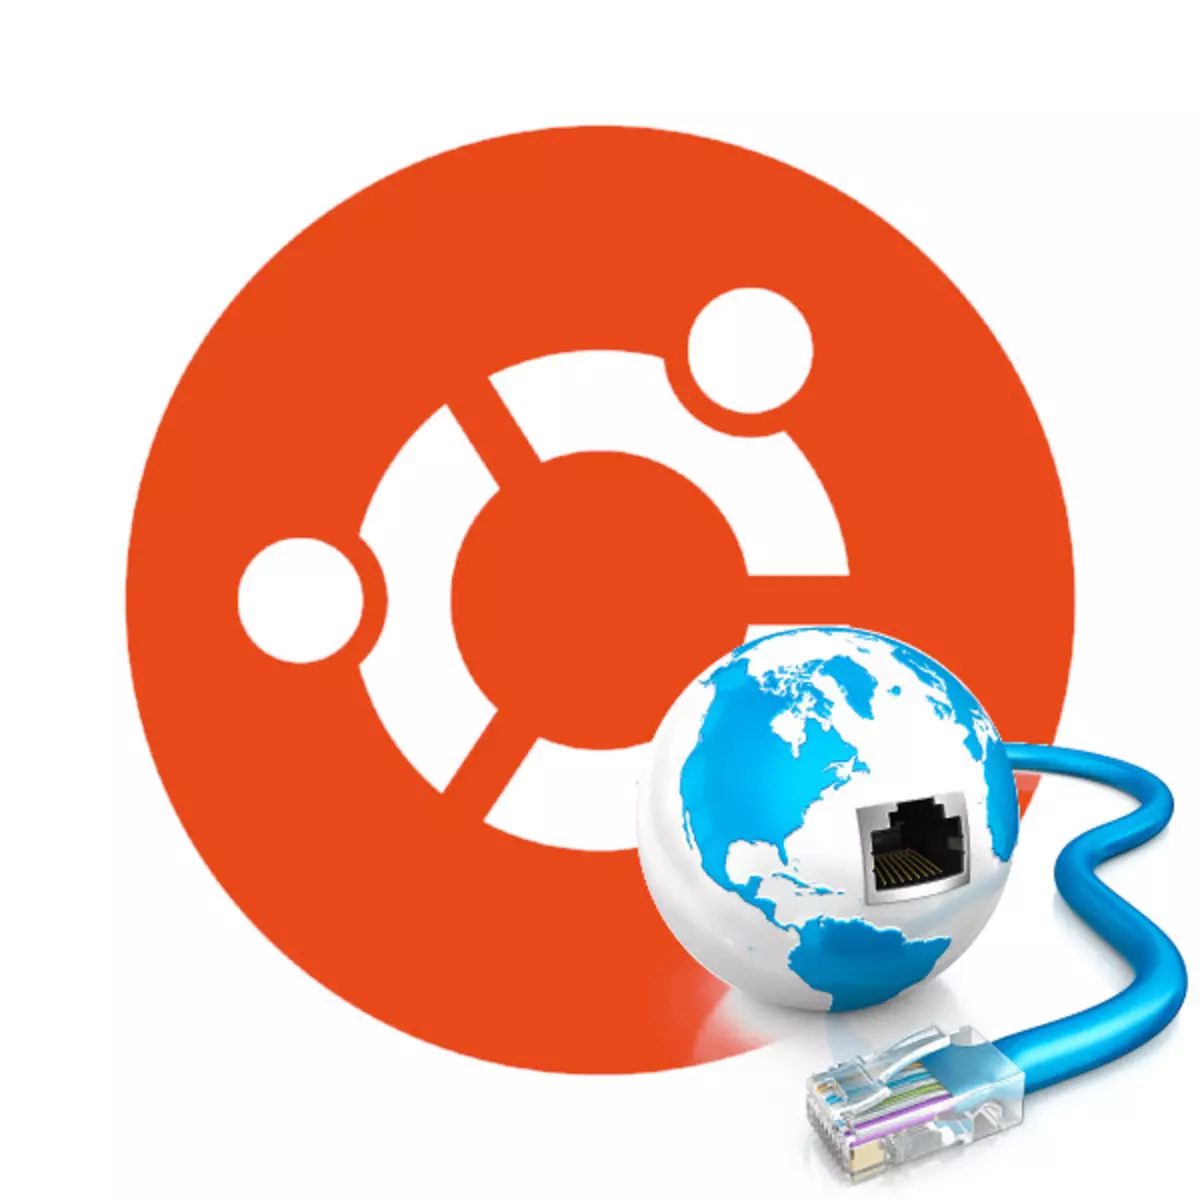 how to set up a network in ubuntu